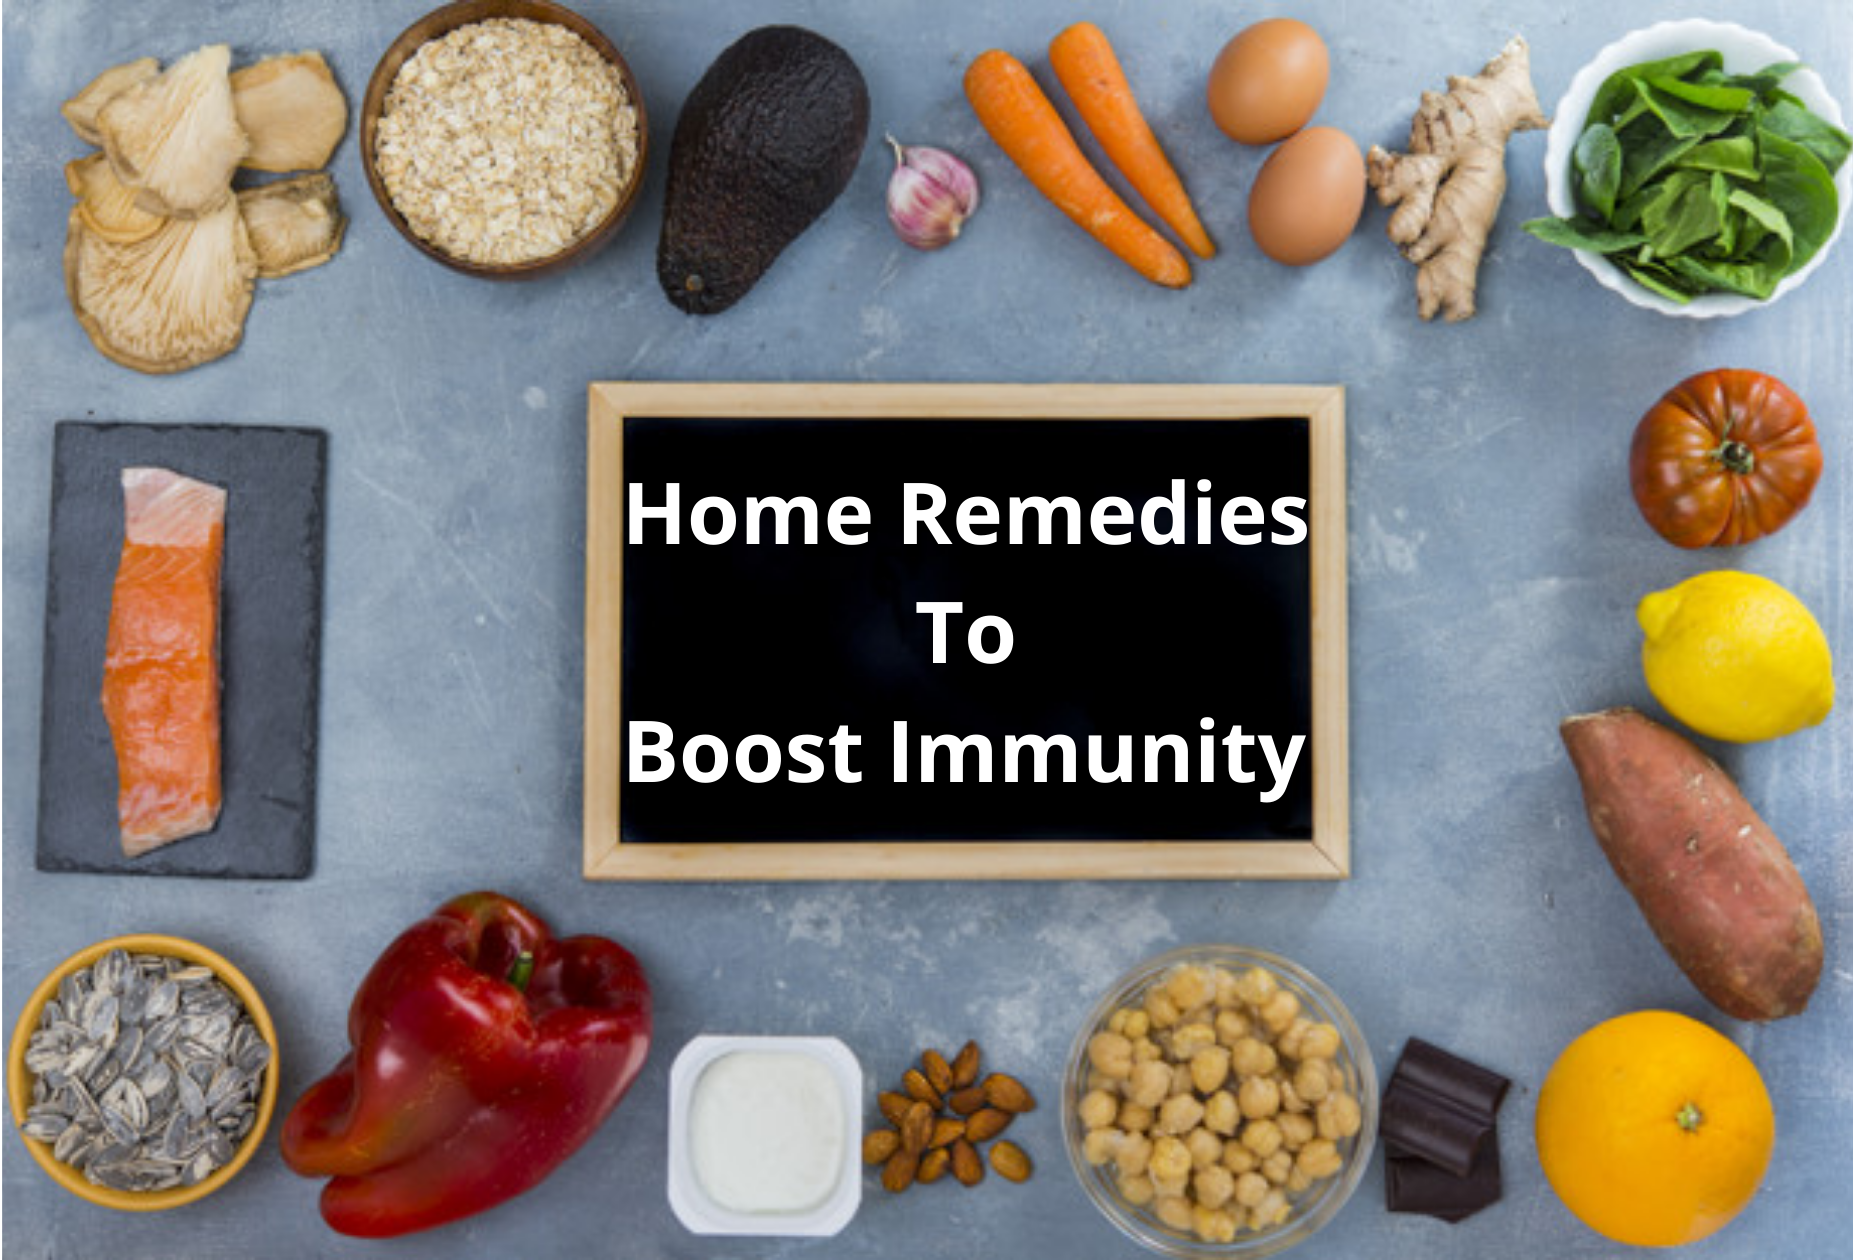 Traditional remedies for immune system support